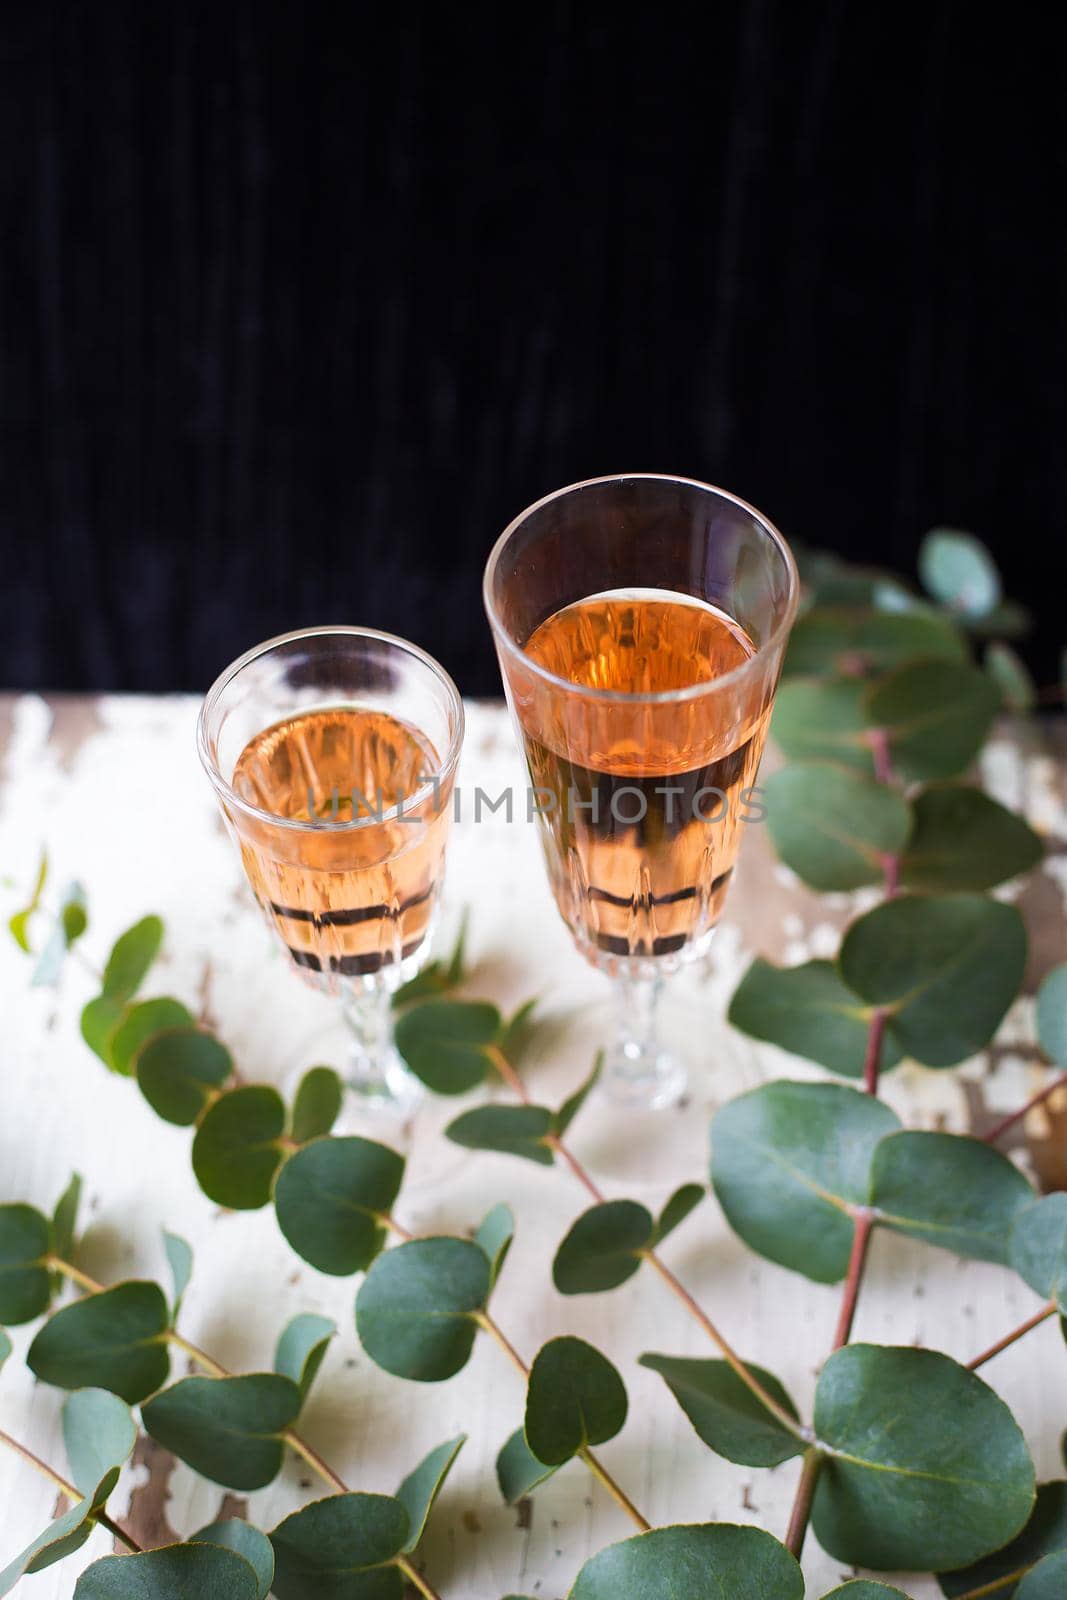 eucalyptus branches on an old table with a glass of rose wine